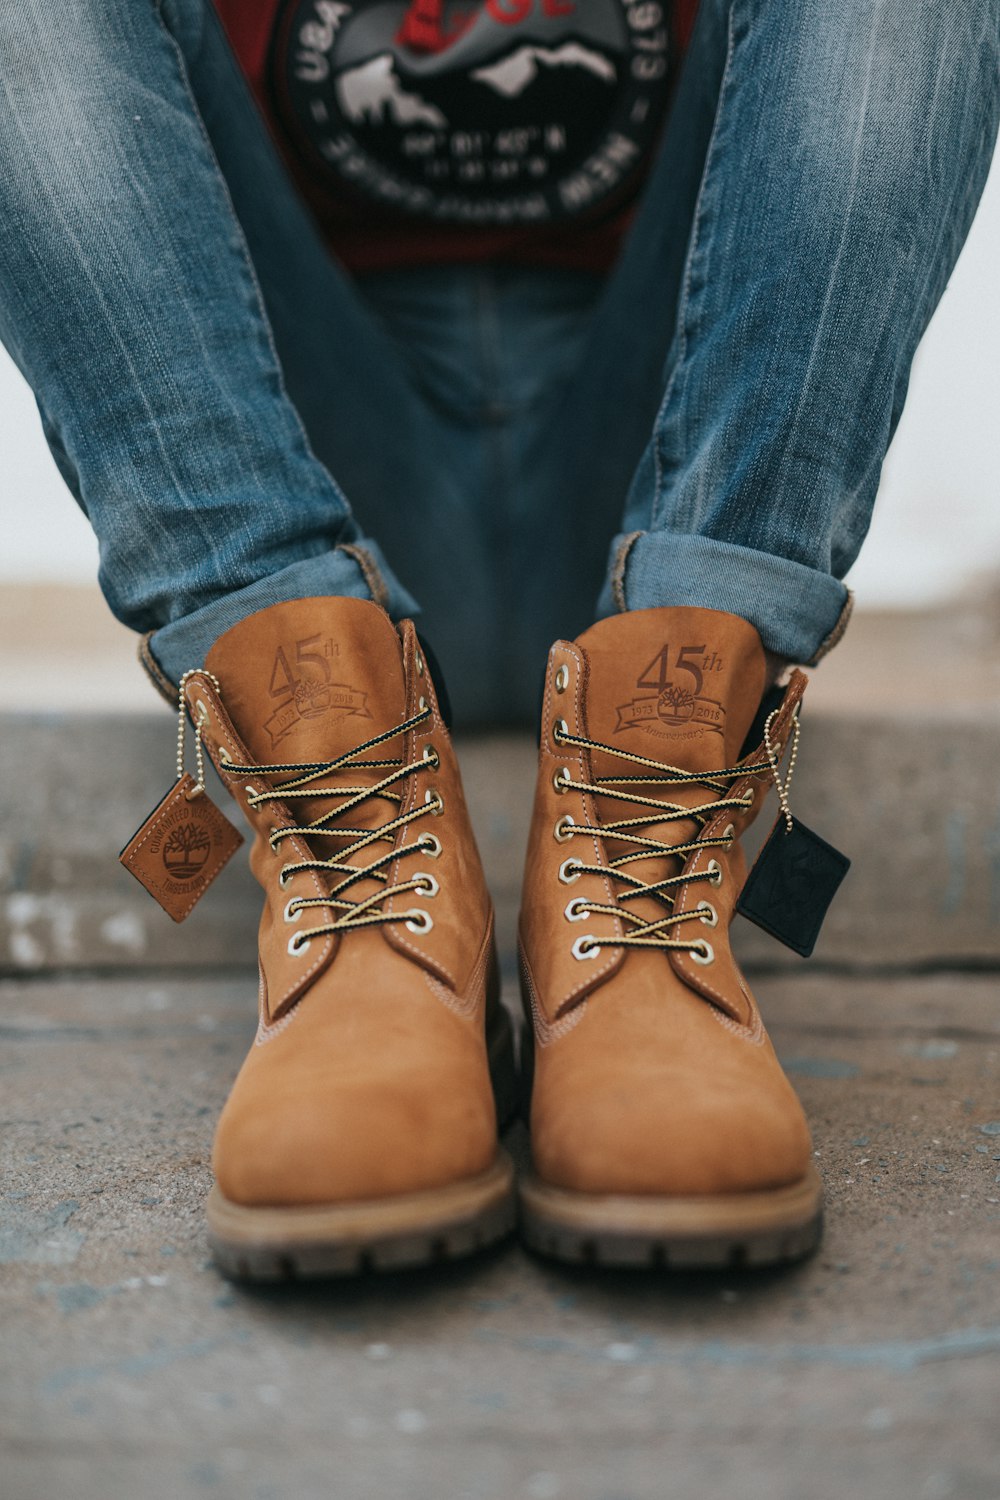 pair of brown leather shoes photo – Free Portland Image on Unsplash